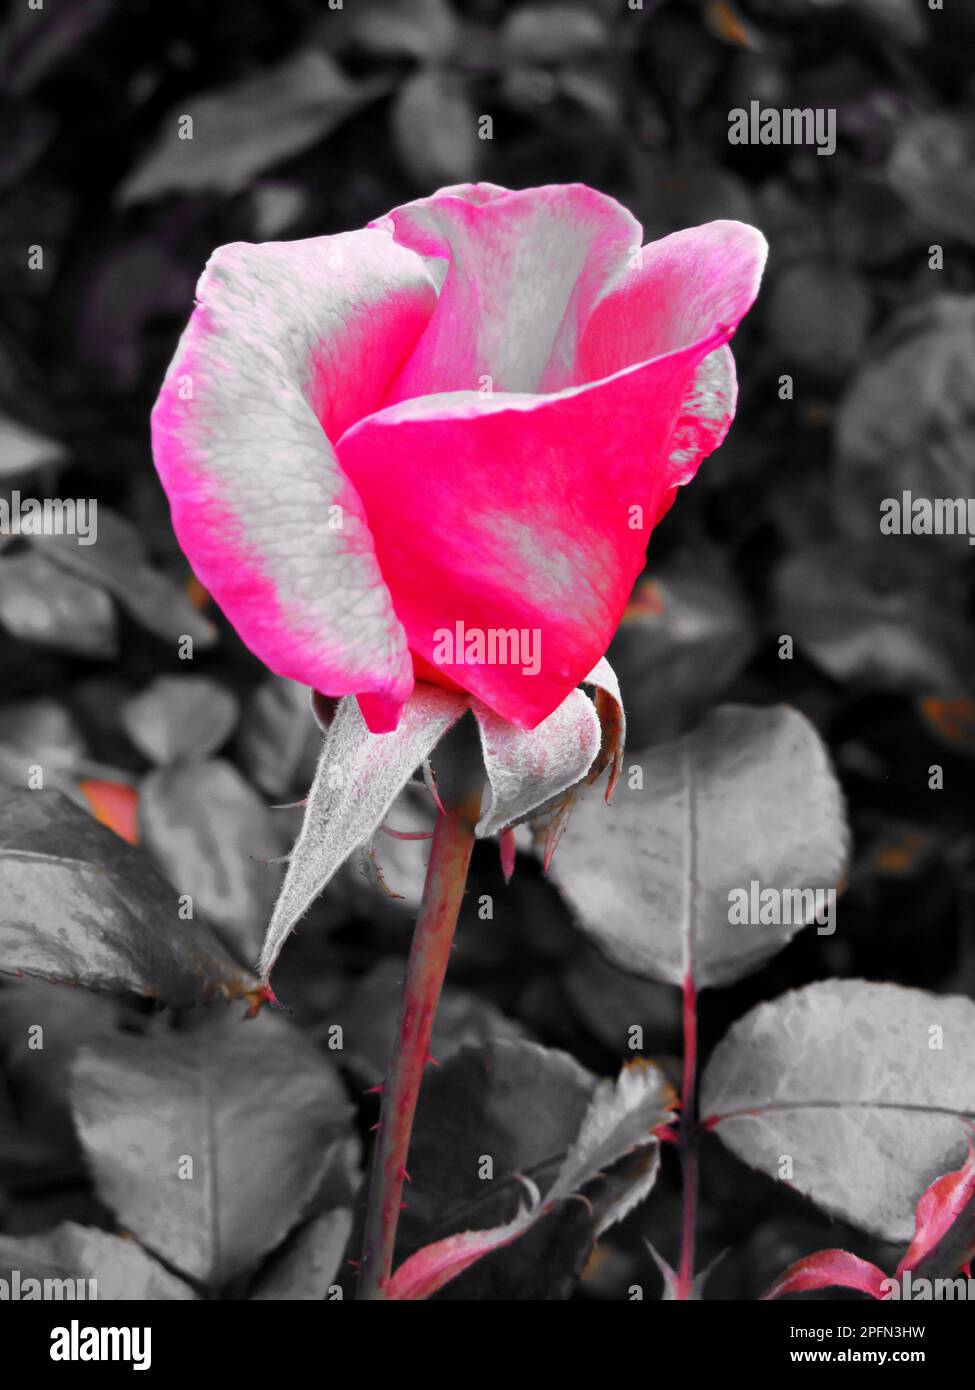 https://c8.alamy.com/comp/2PFN3HW/pink-rose-bud-photographed-using-a-selective-color-filter-showing-only-pink-with-the-rest-of-the-area-in-black-and-white-2PFN3HW.jpg